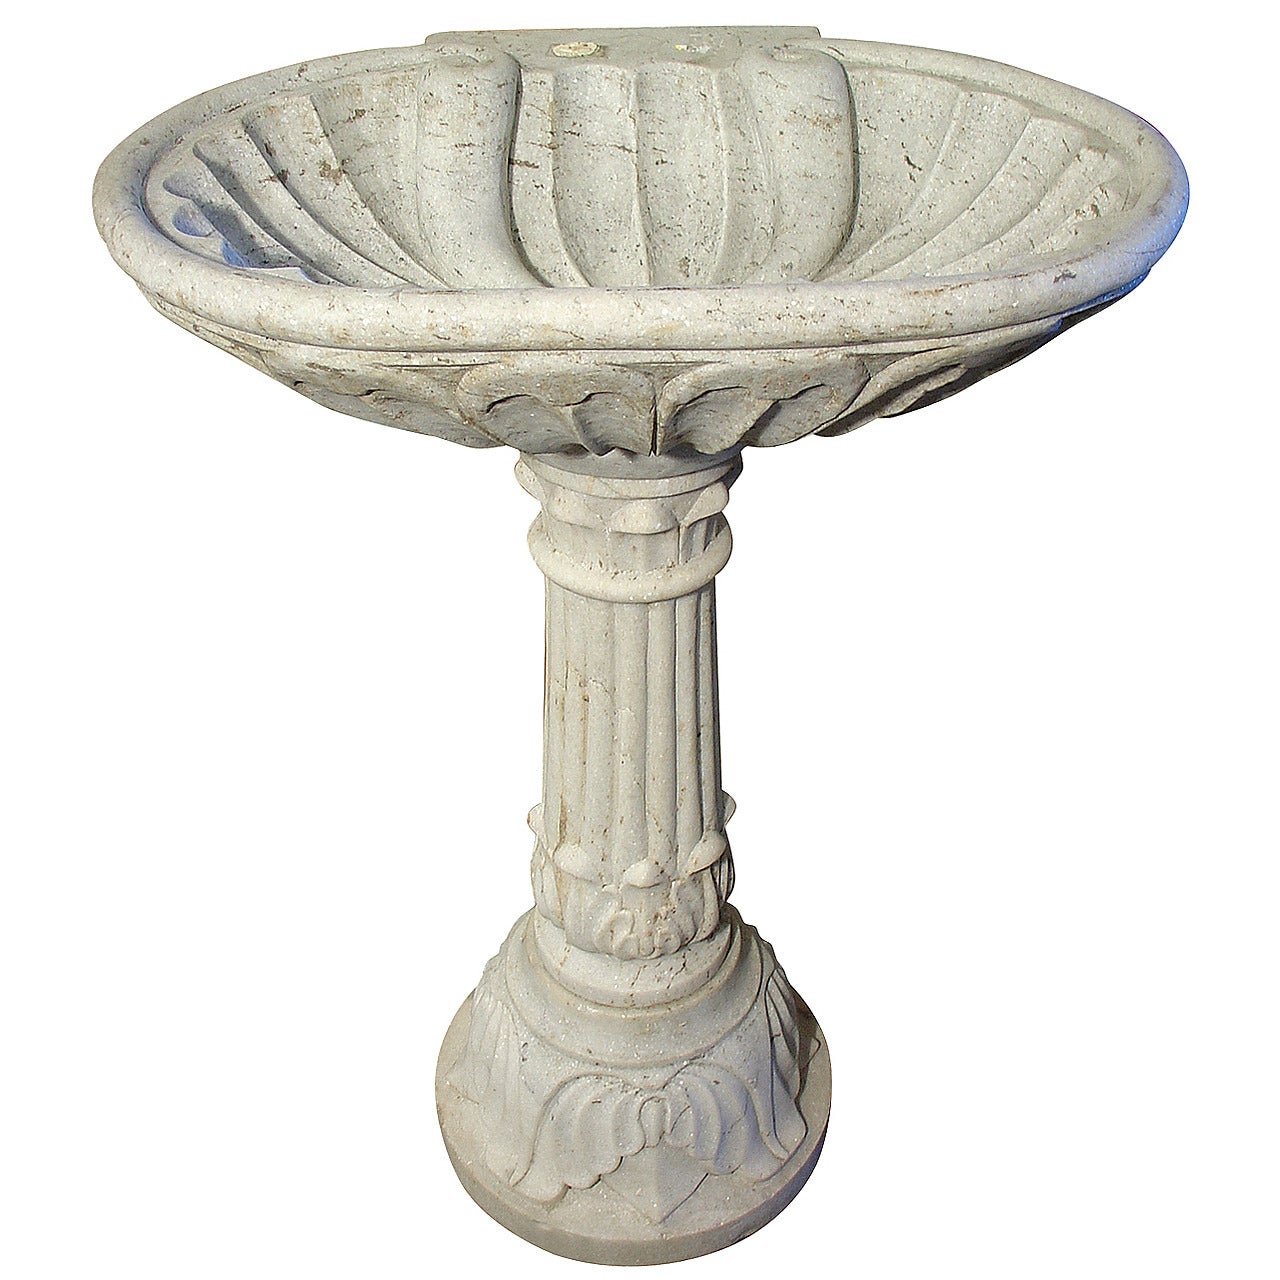 Antique Marble Pedestal Sink from France, Circa 1900